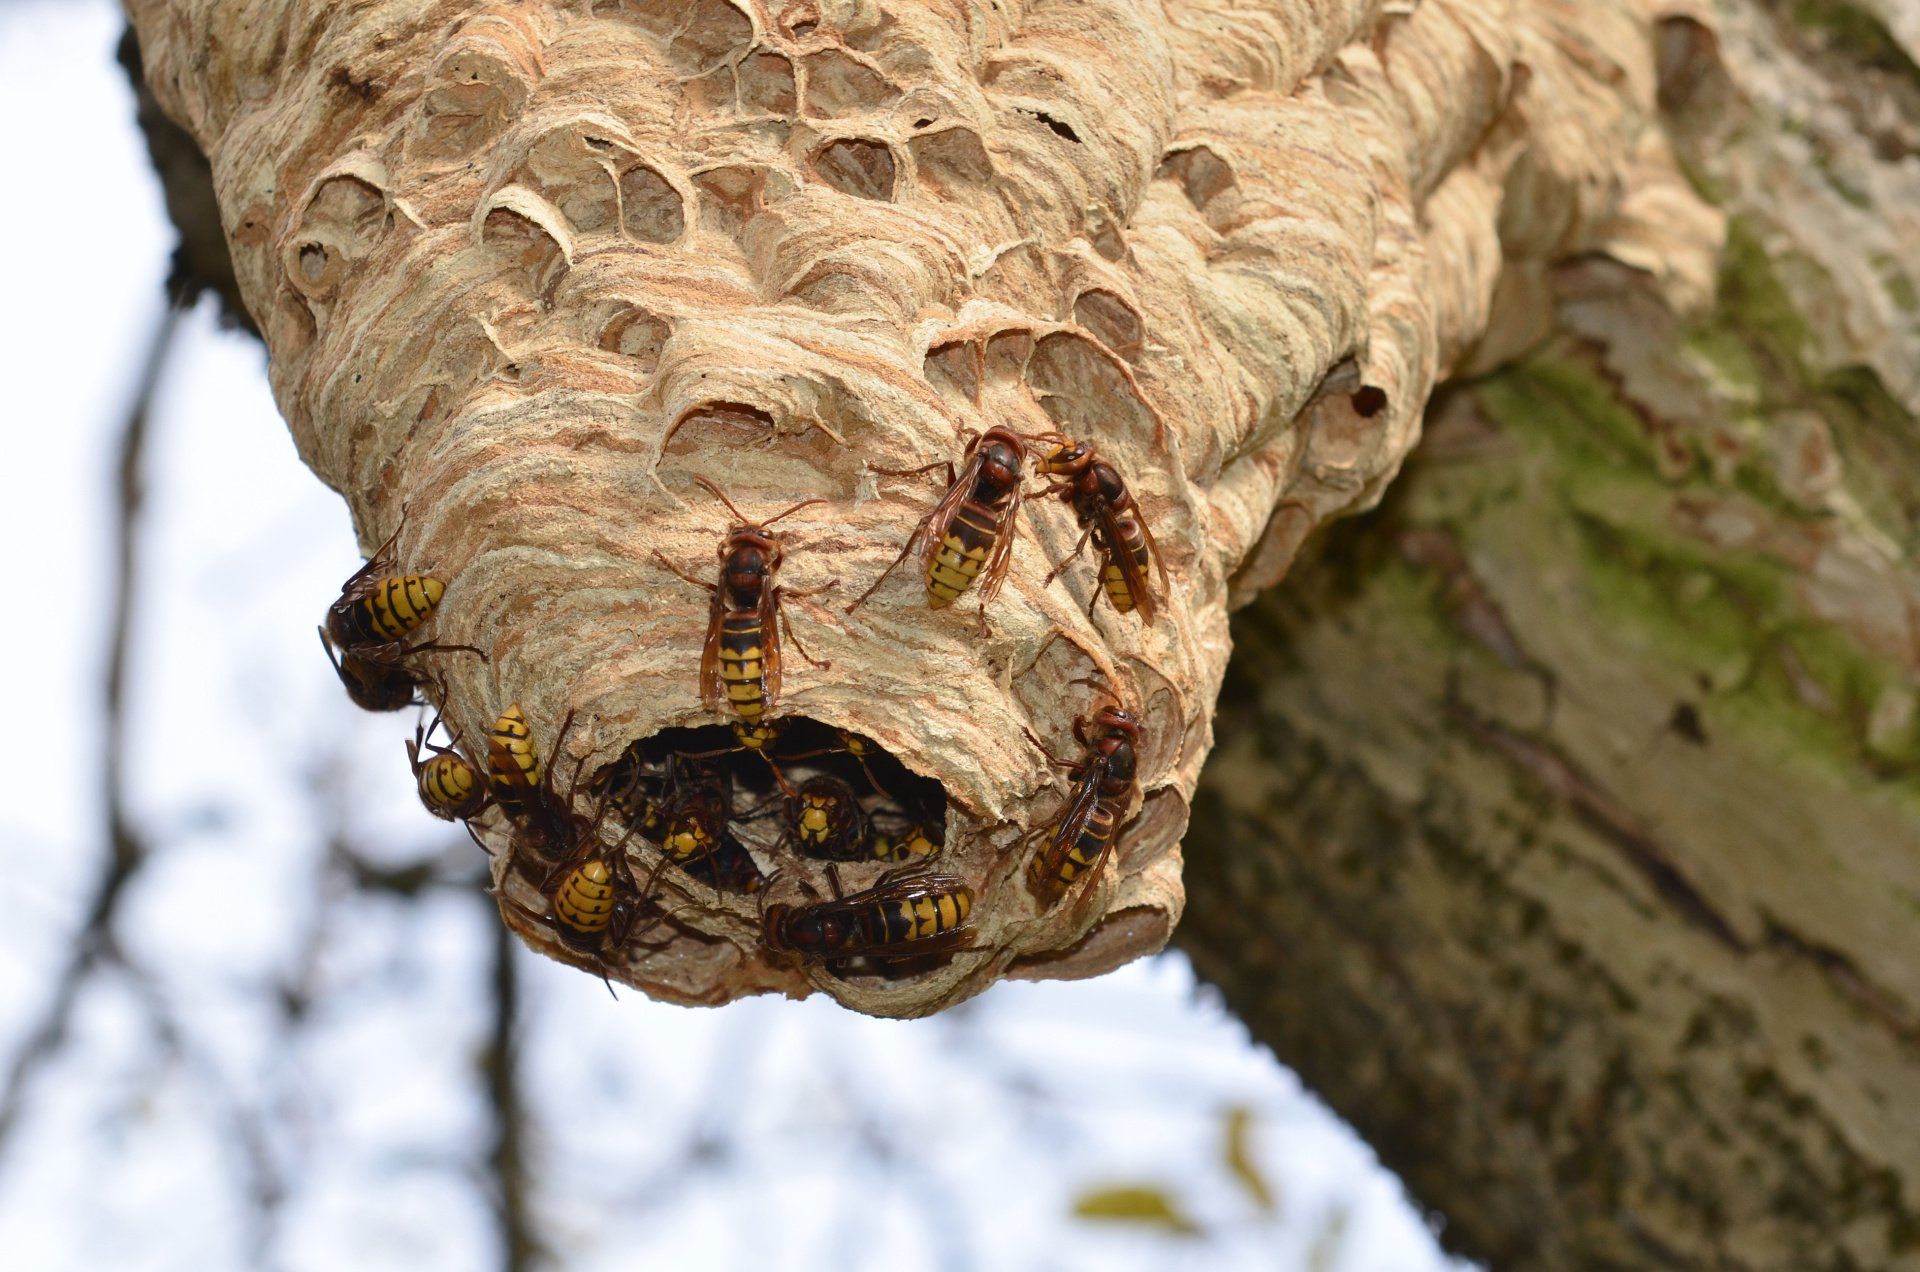 a close up of a wasp nest hanging from a tree branch .